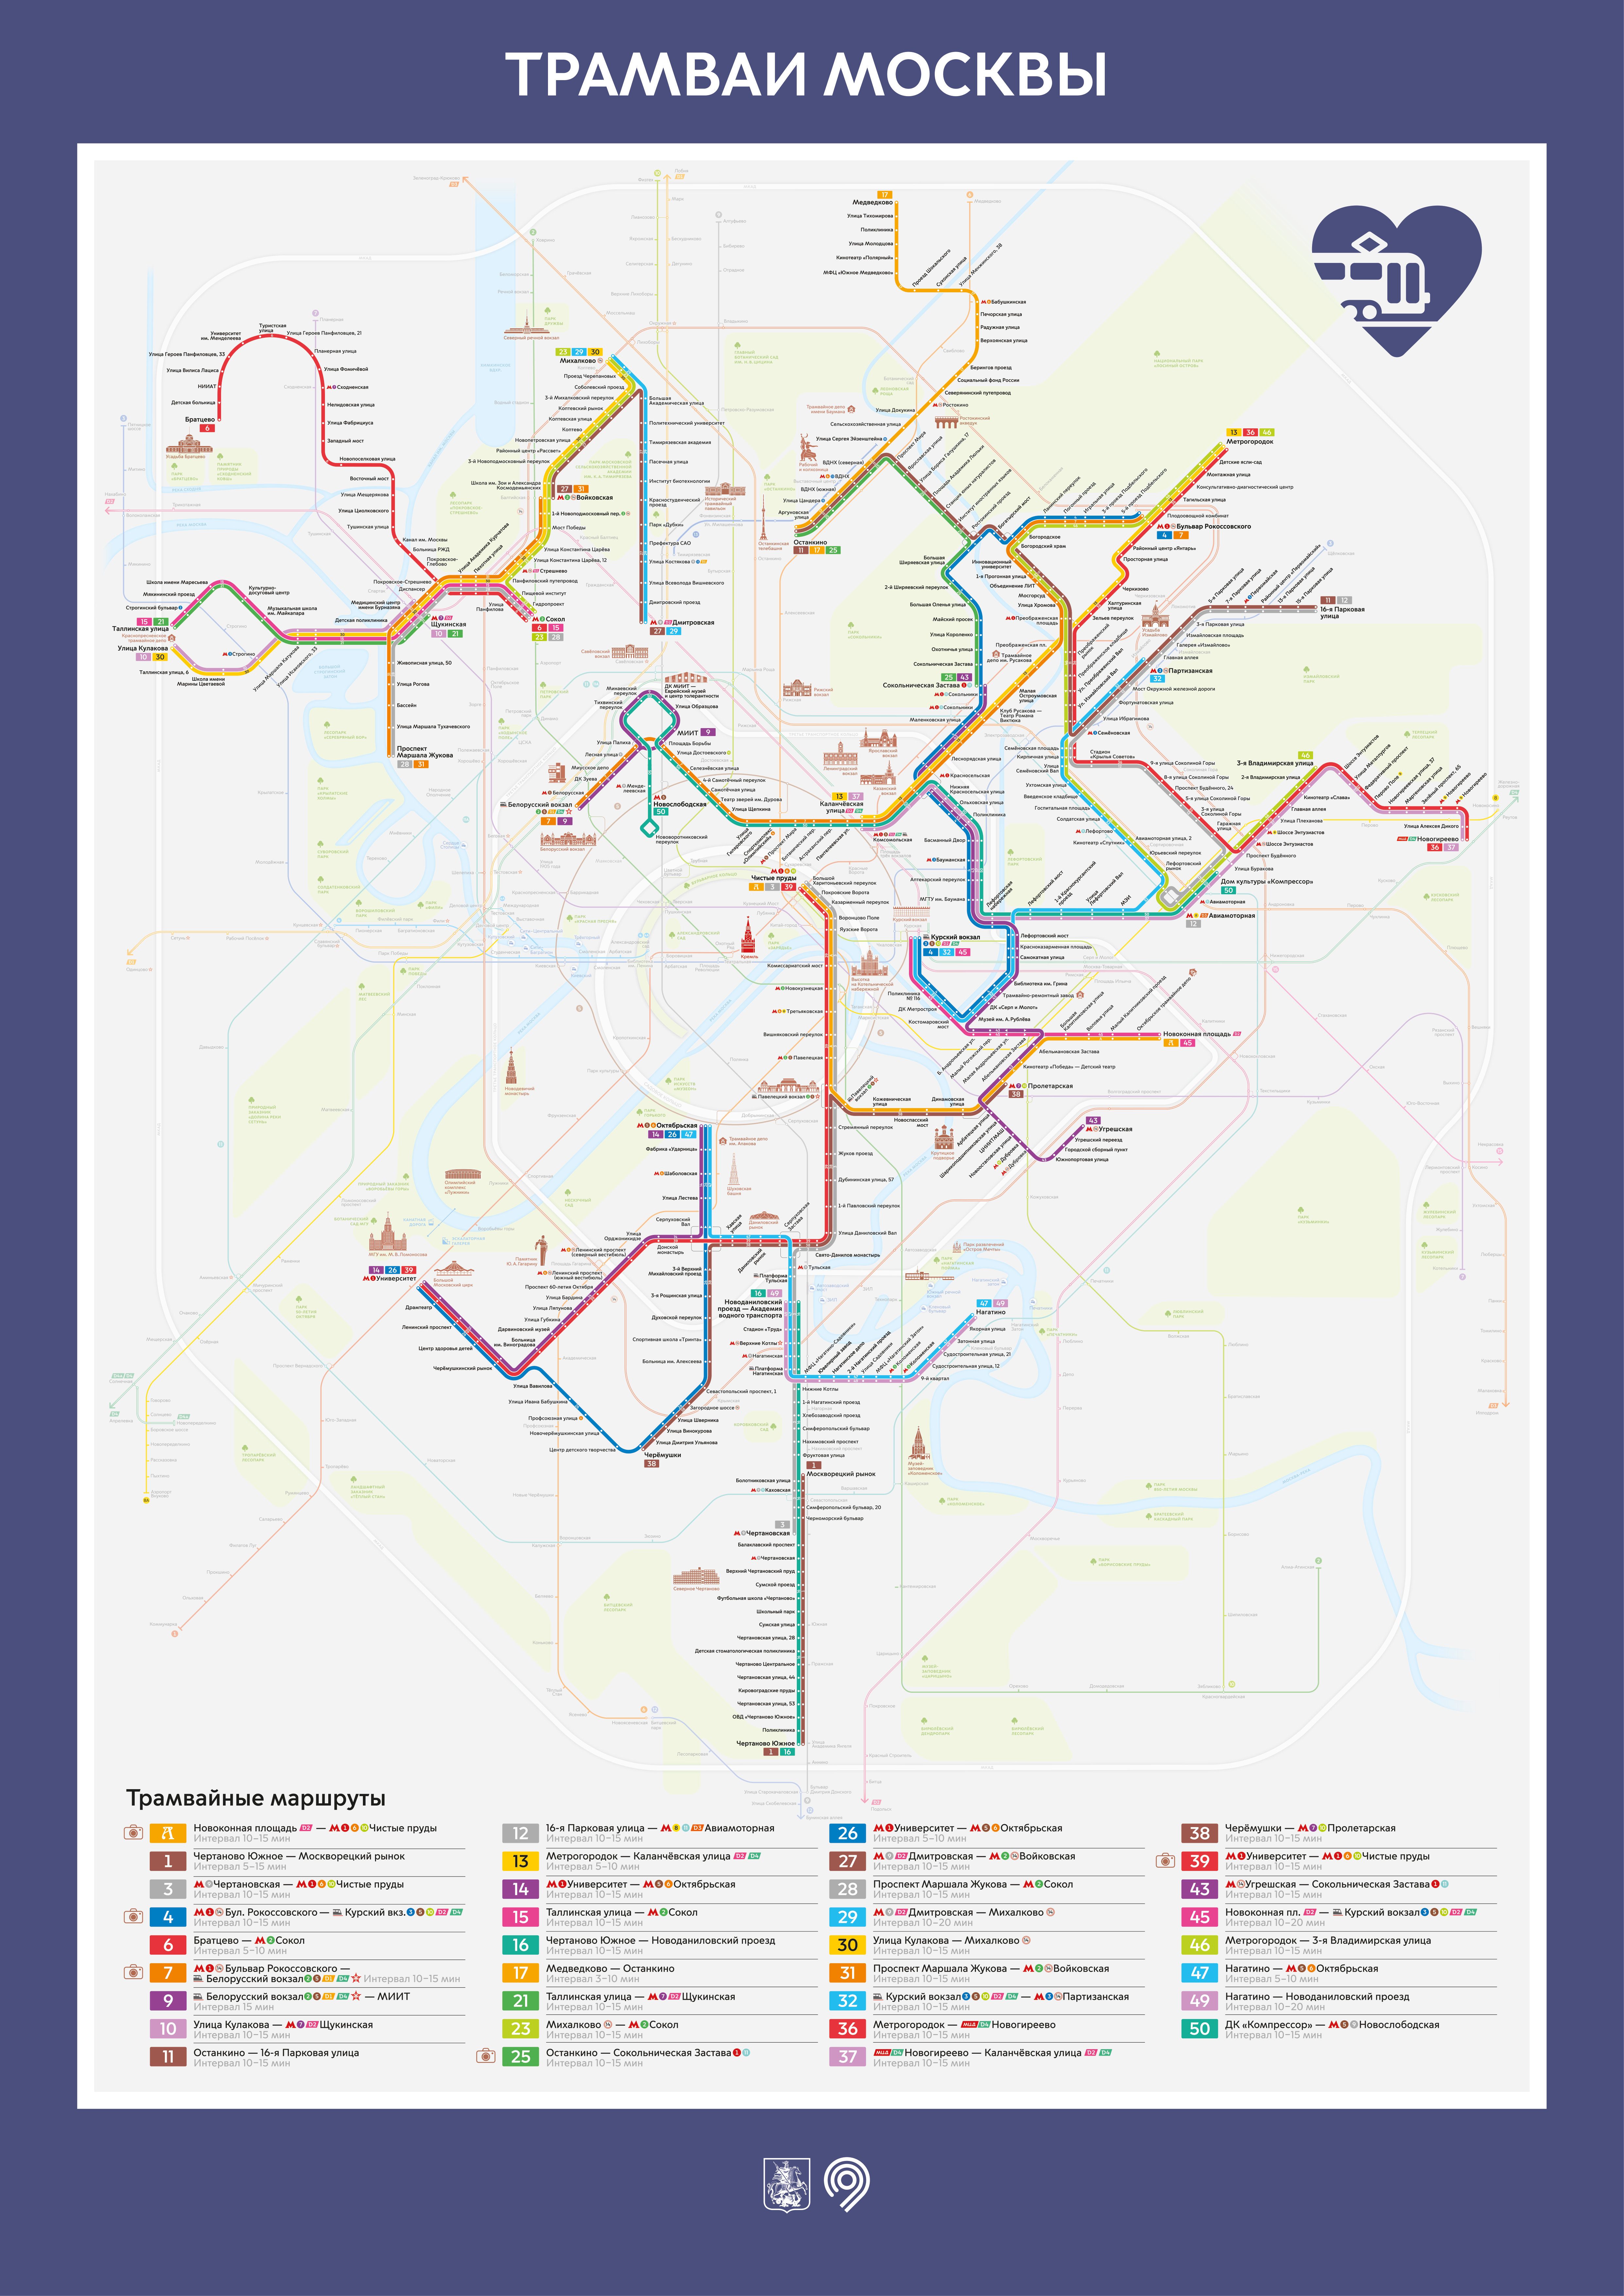 Moszkva — Citywide Maps; Moszkva — Tramway and Trolleybus Infrastructure Maps